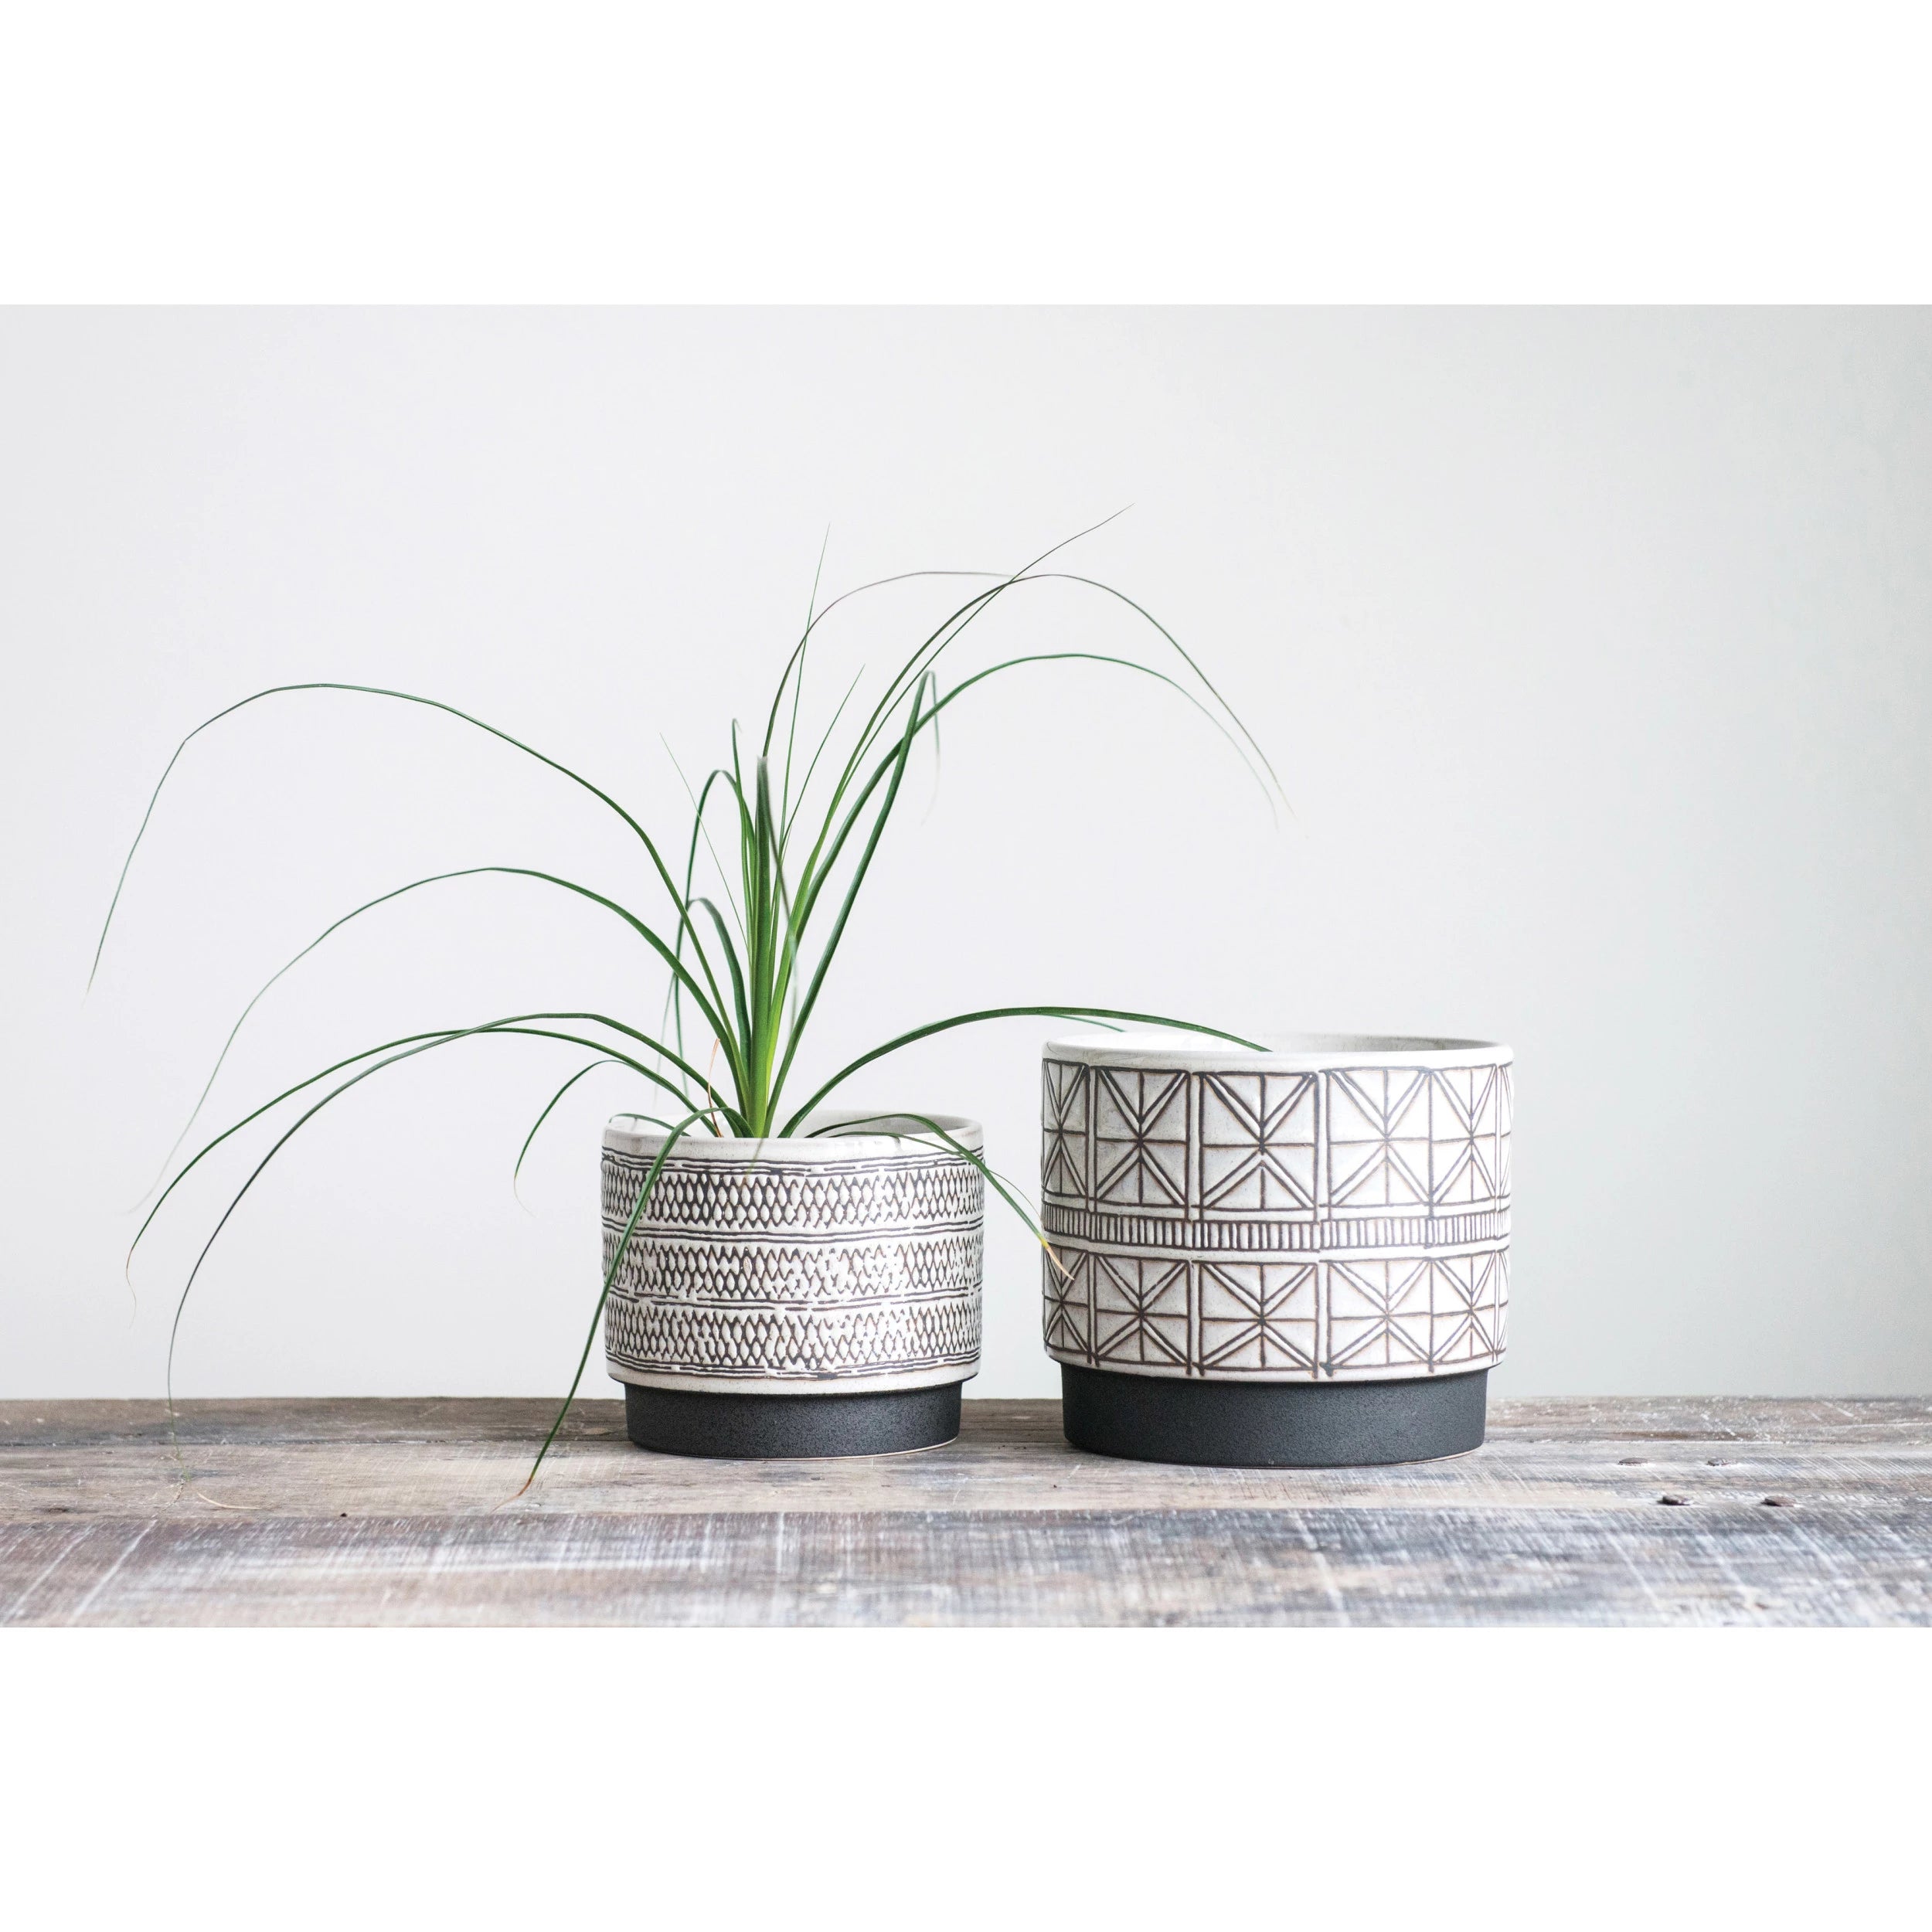 Sketchy Style Stoneware Planters